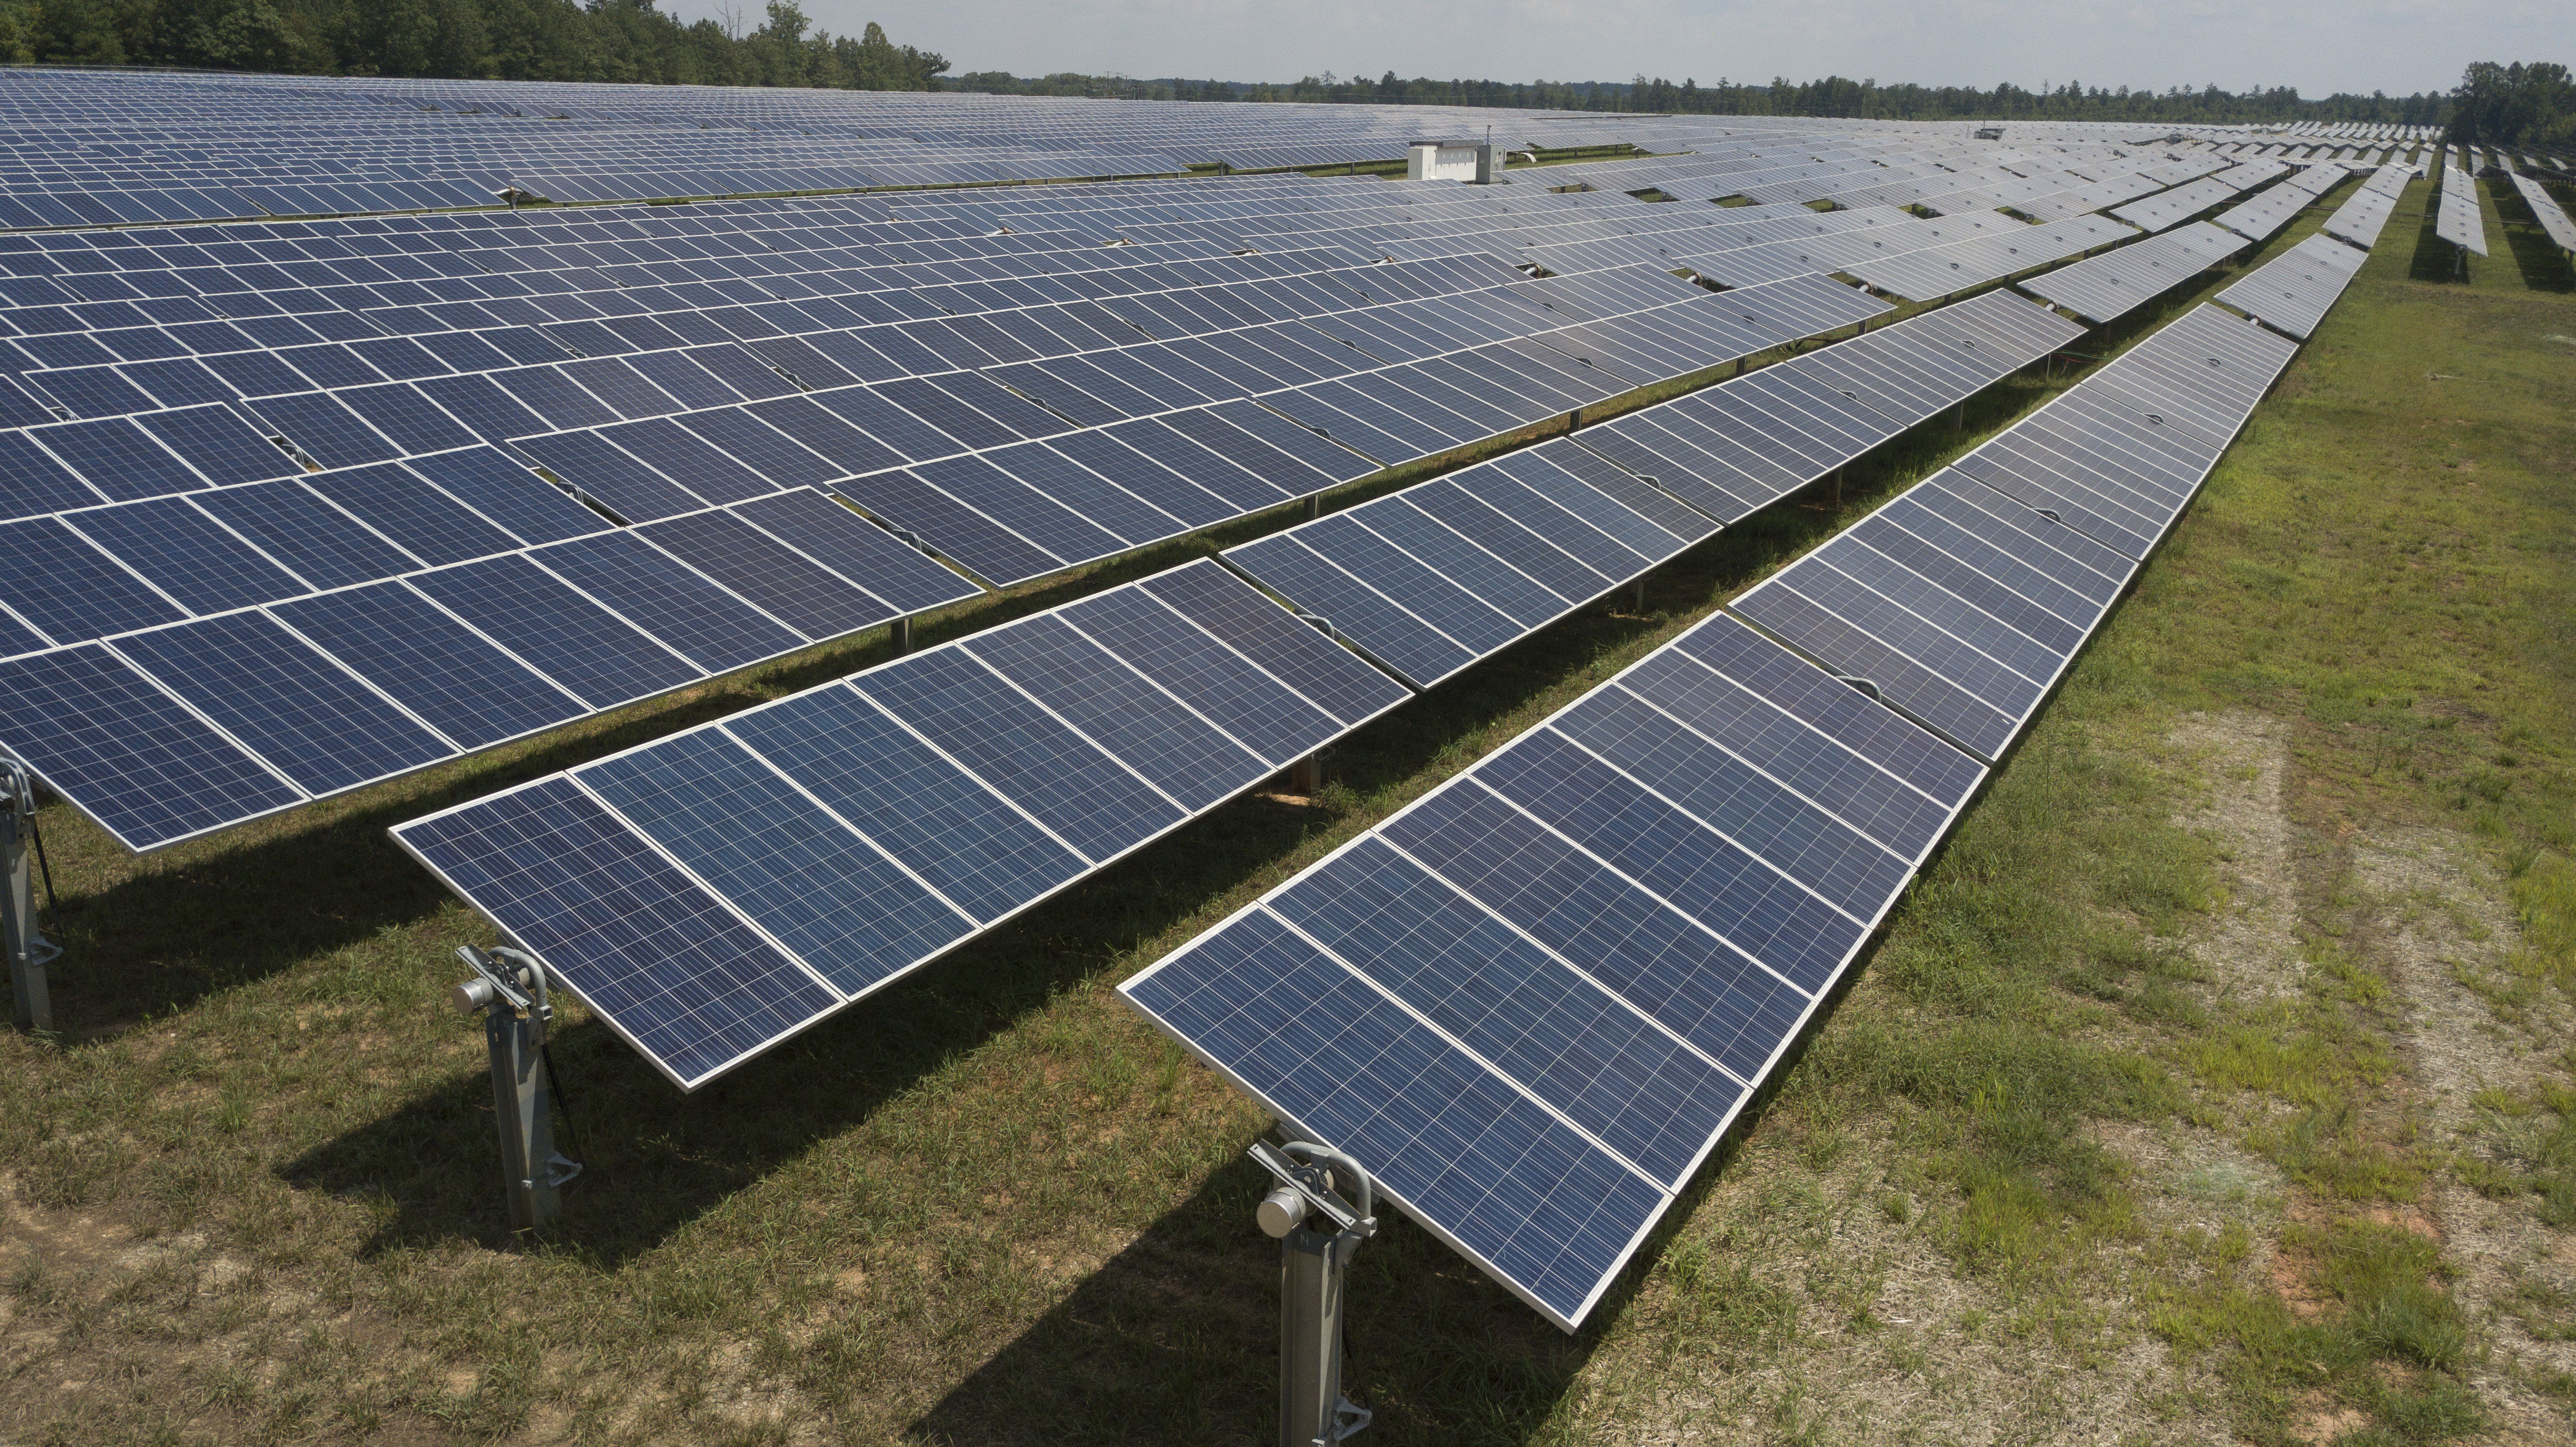 dominion-s-biggest-solar-project-will-be-in-prince-george-co-wtop-news